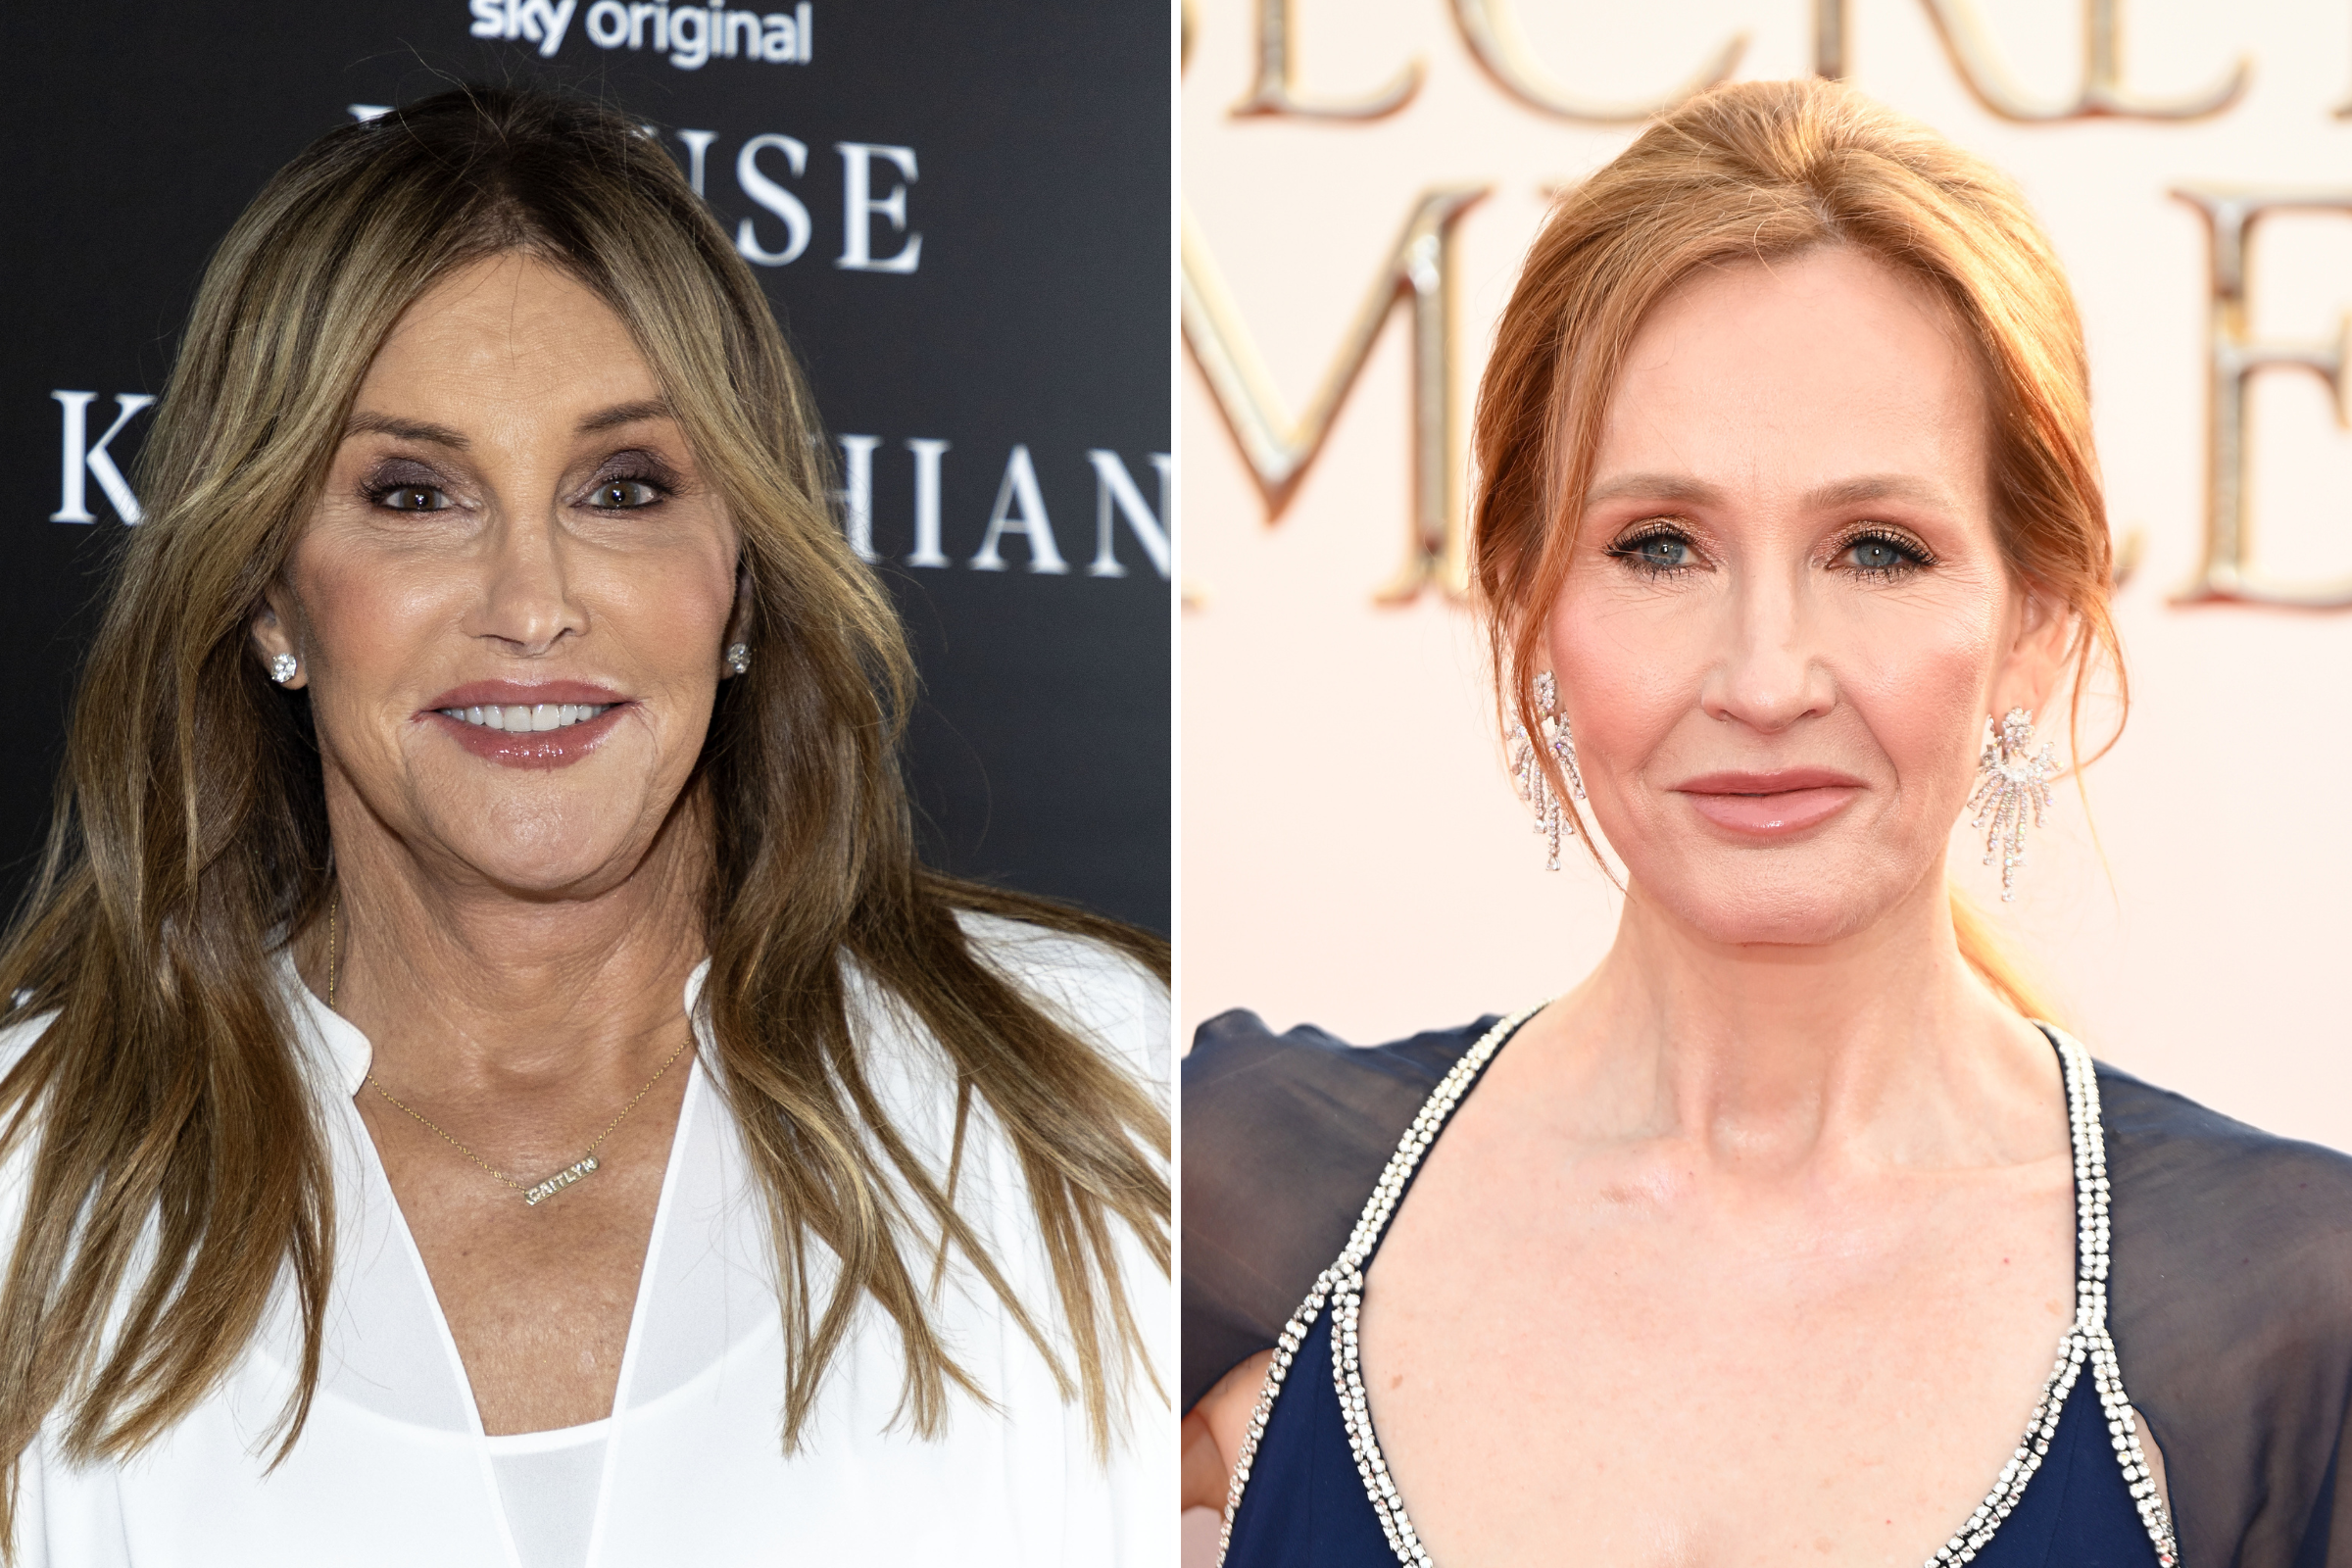 Caitlyn Jenner Reacts to Possible JK Rowling Arrest